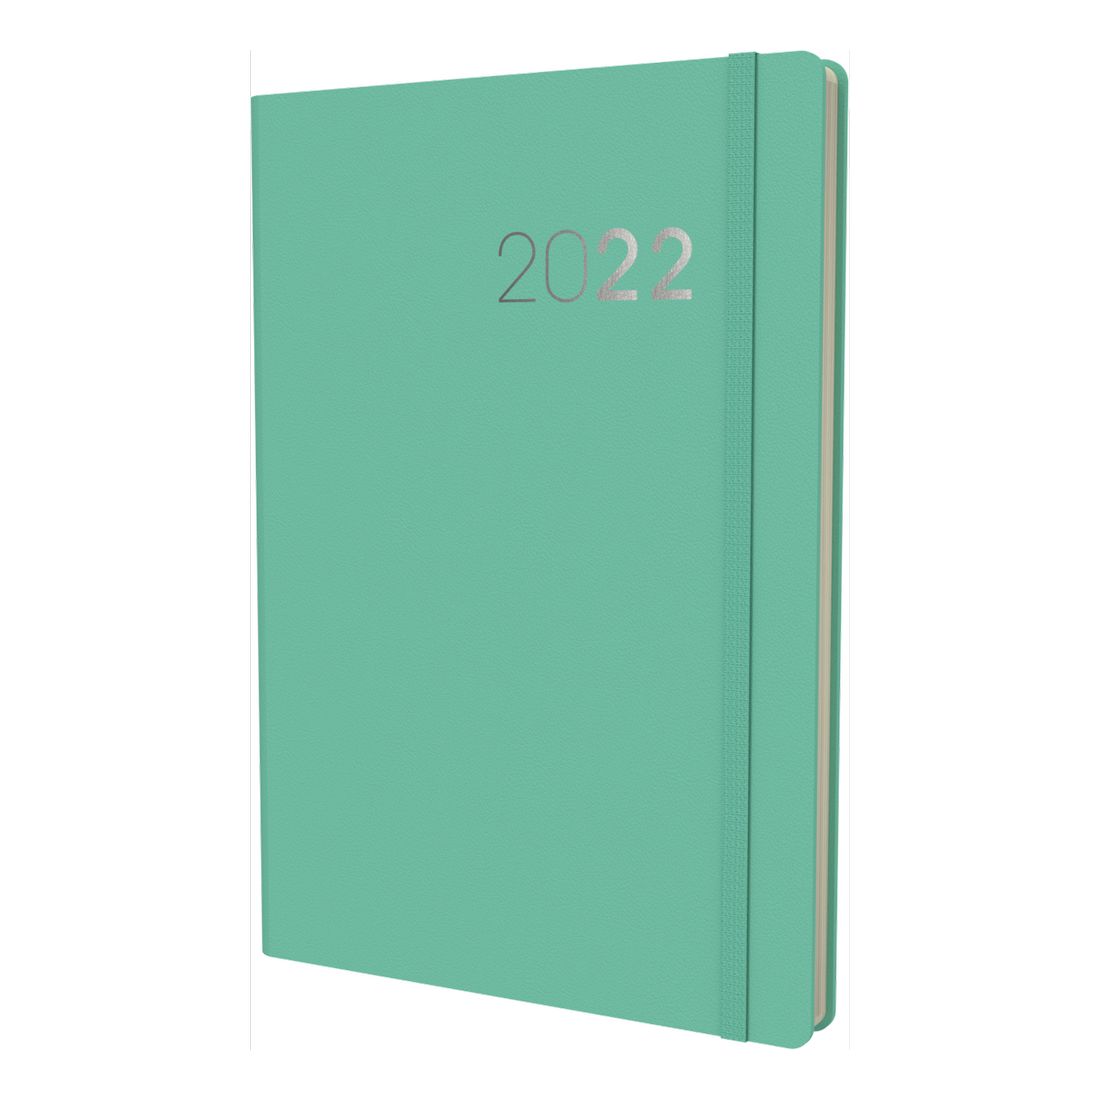 Collins Debden Legacy A5 Week To View Diary 2022 Mint